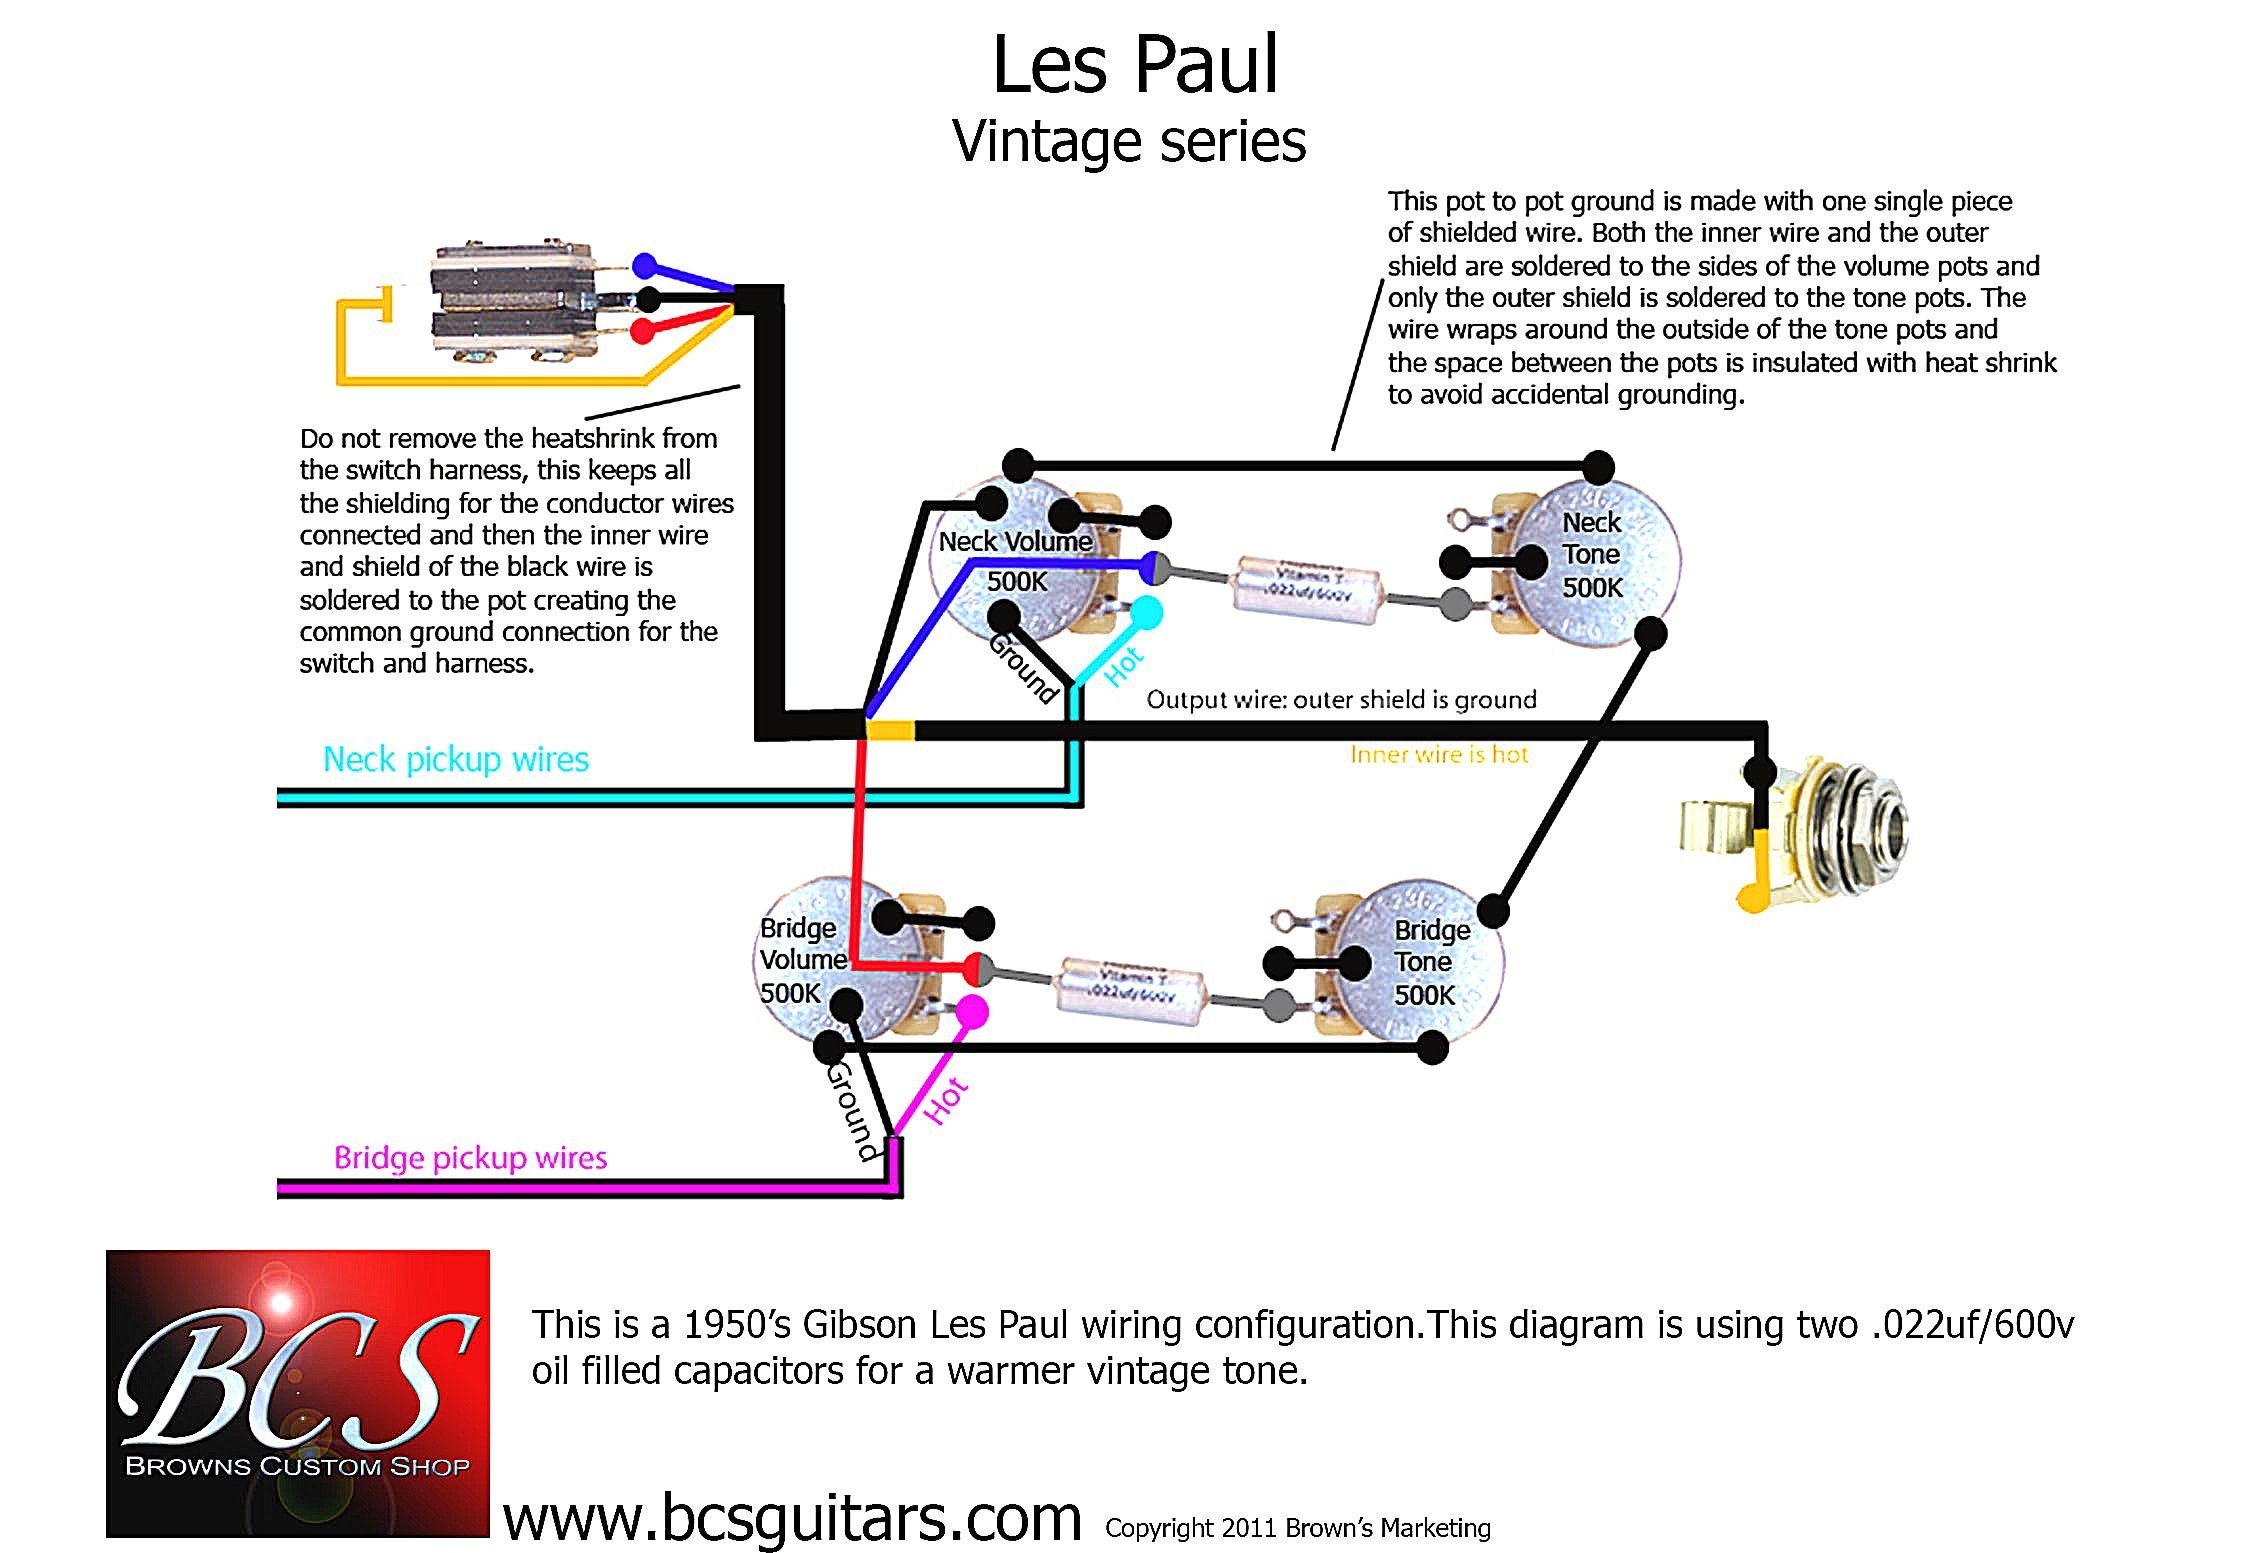 Les Paul Wiring Schematics Wiring Schematic Database Les Paul Switch Wiring Diagram Gibson Les Paul Wiring Mods